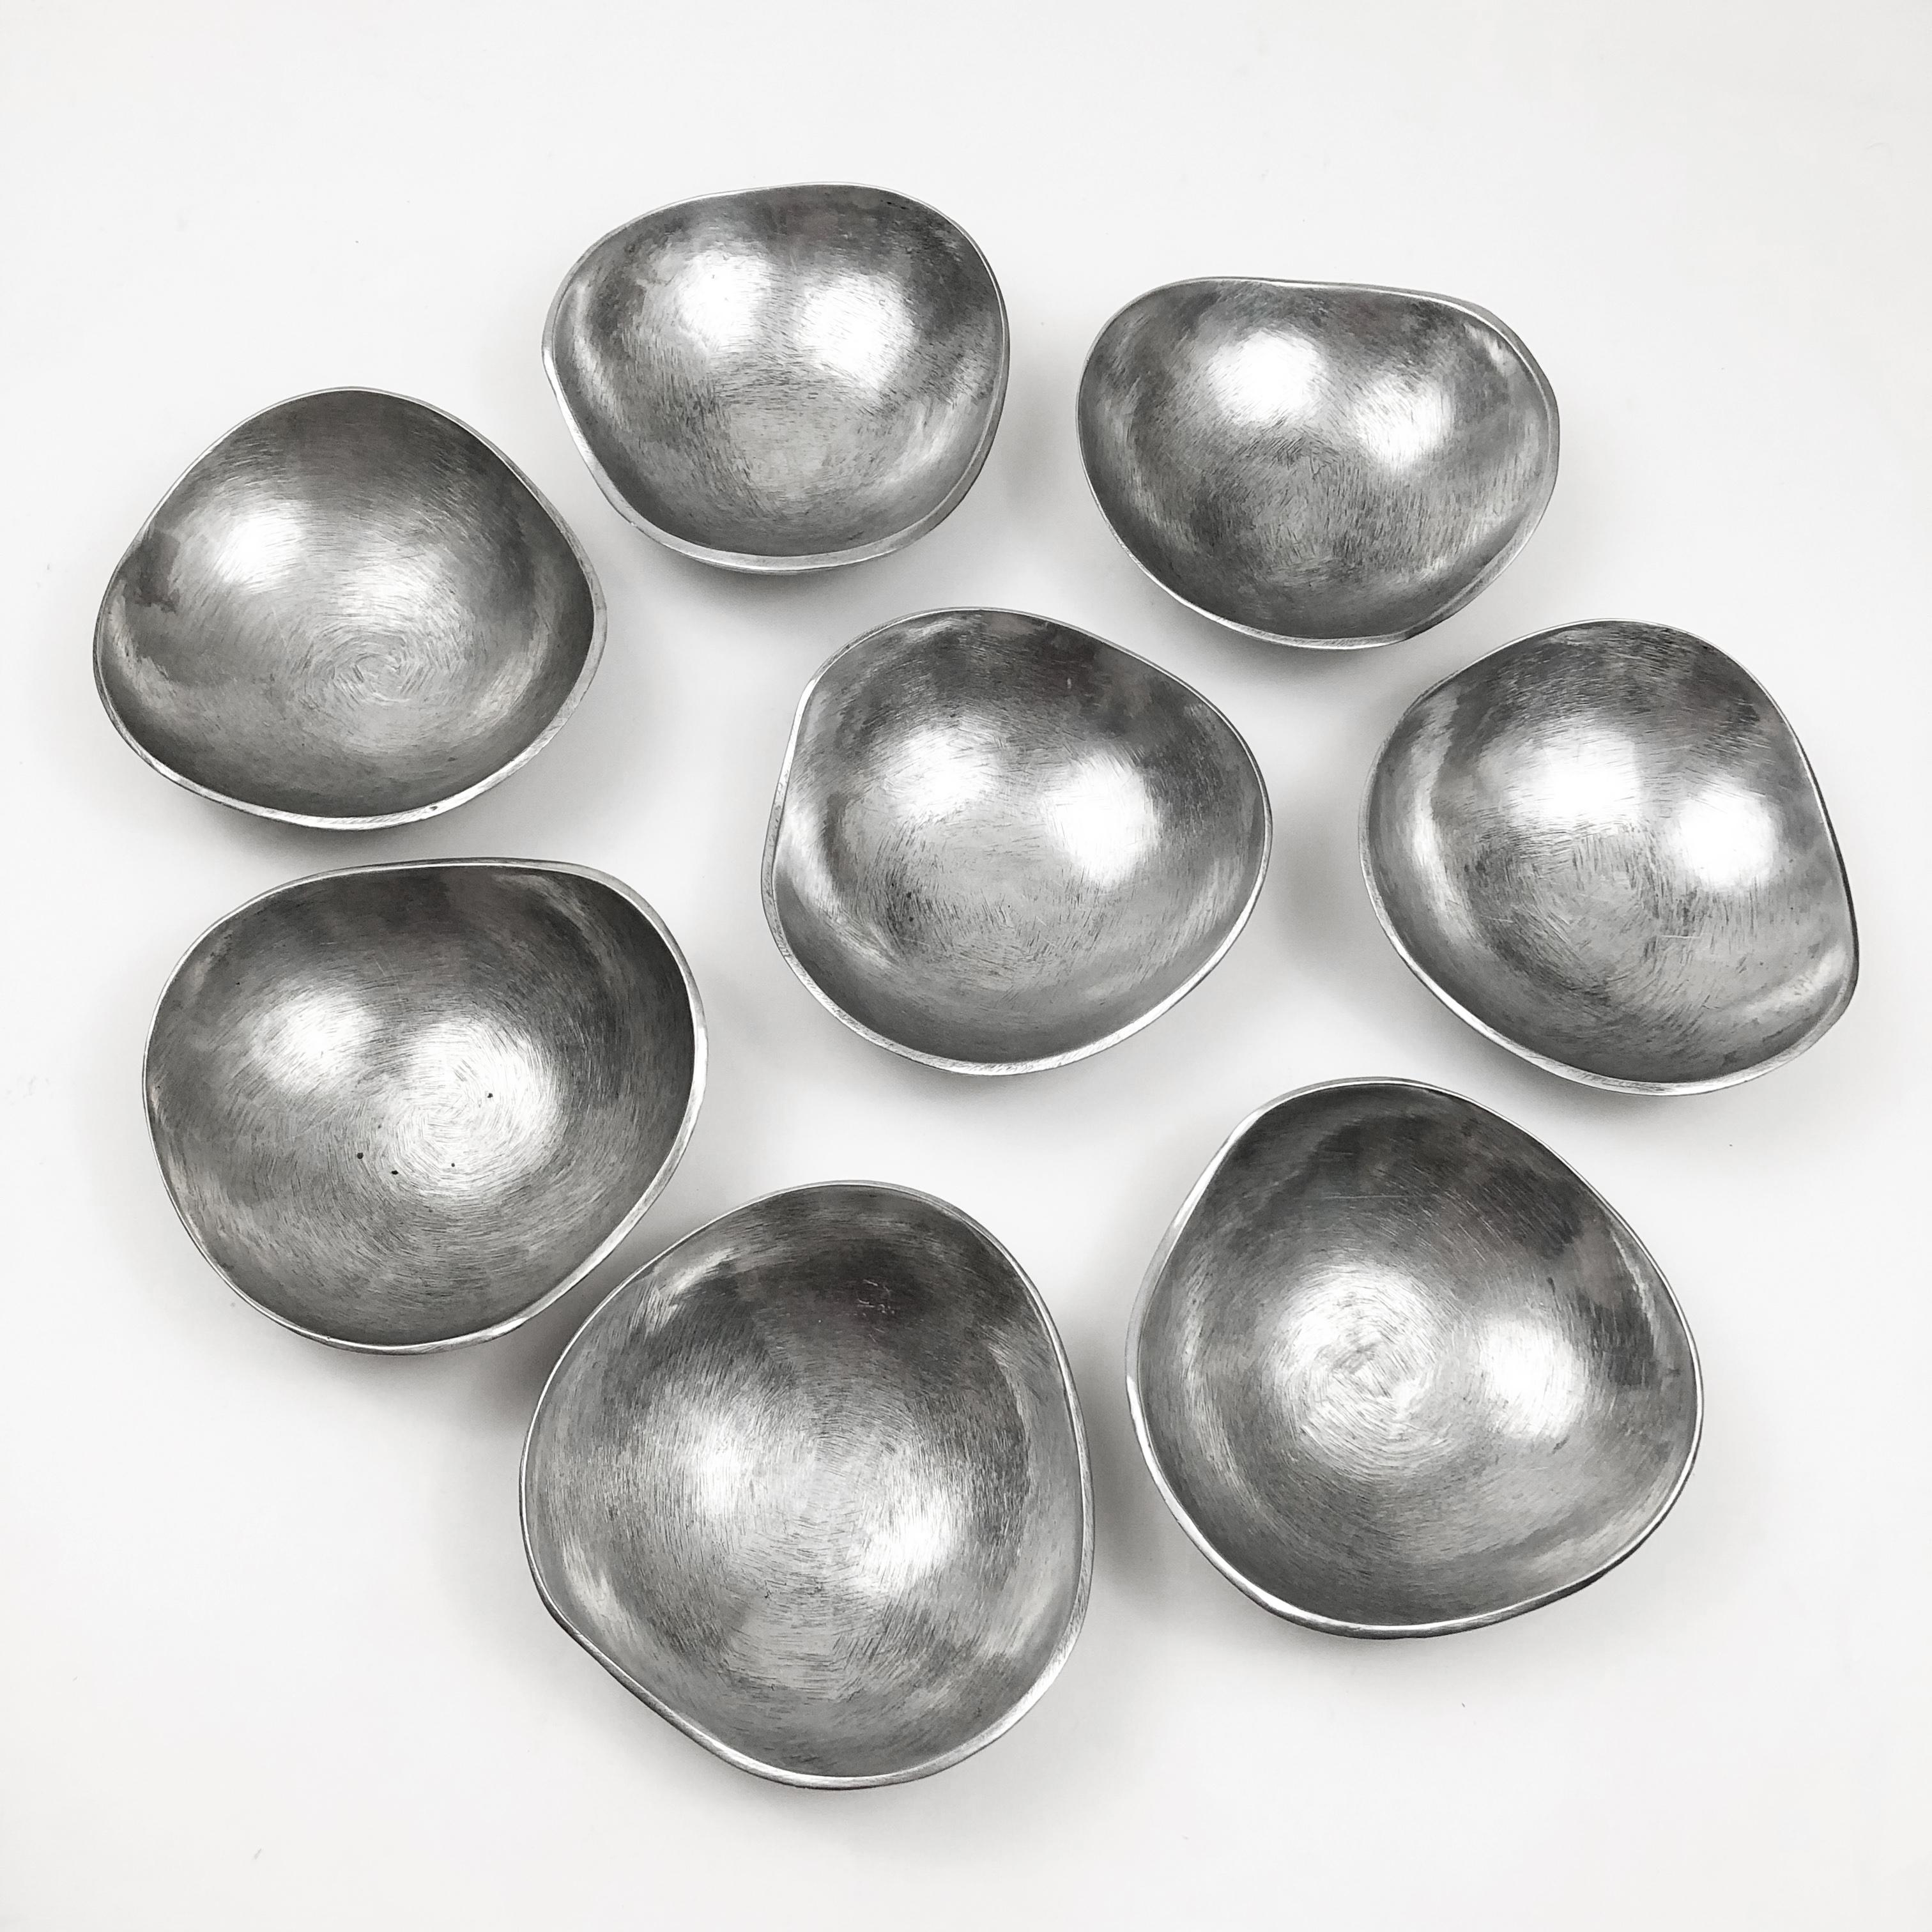 Hammered Set of Biomorphic Salad Bowls by Bruce C. Fox